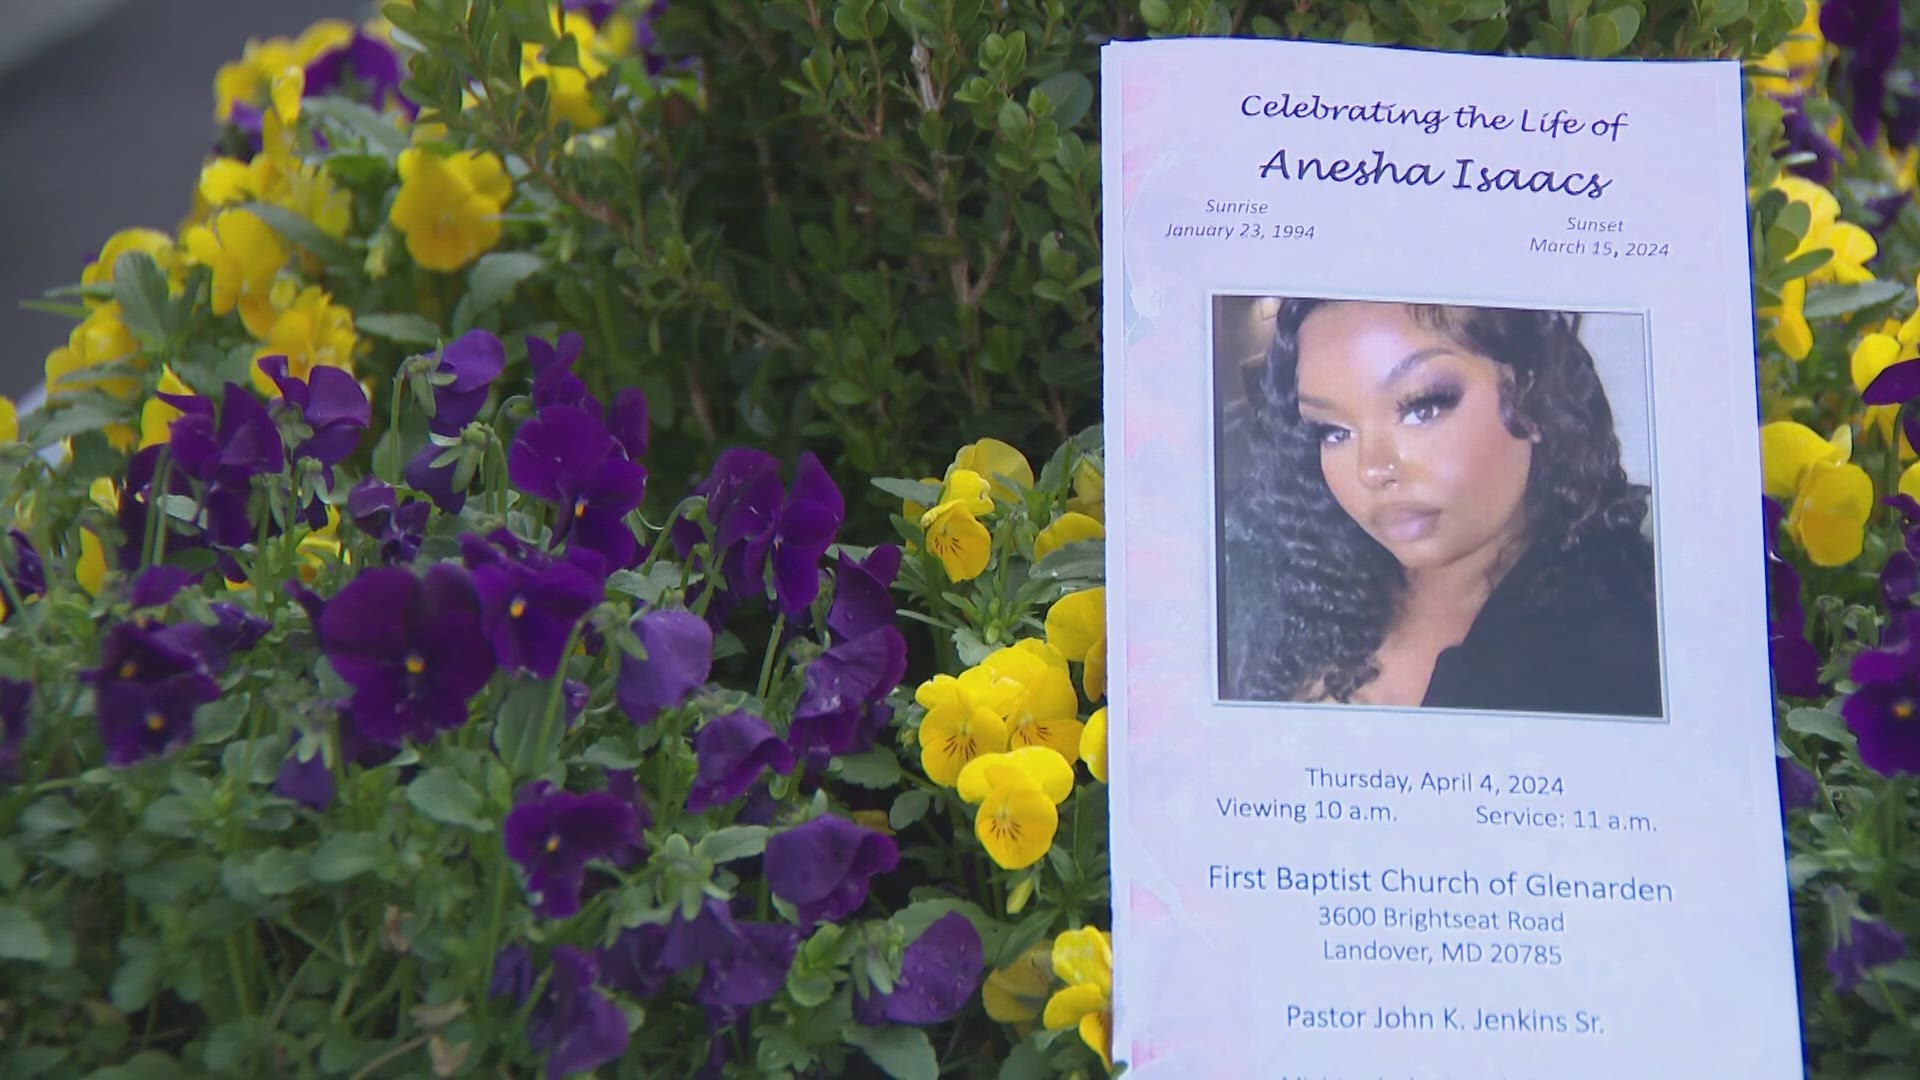 Anesha Isaacs, 30, is remembered as compassionate and funny. Police say her ex-boyfriend, who she had a restraining order against, shot her several times.